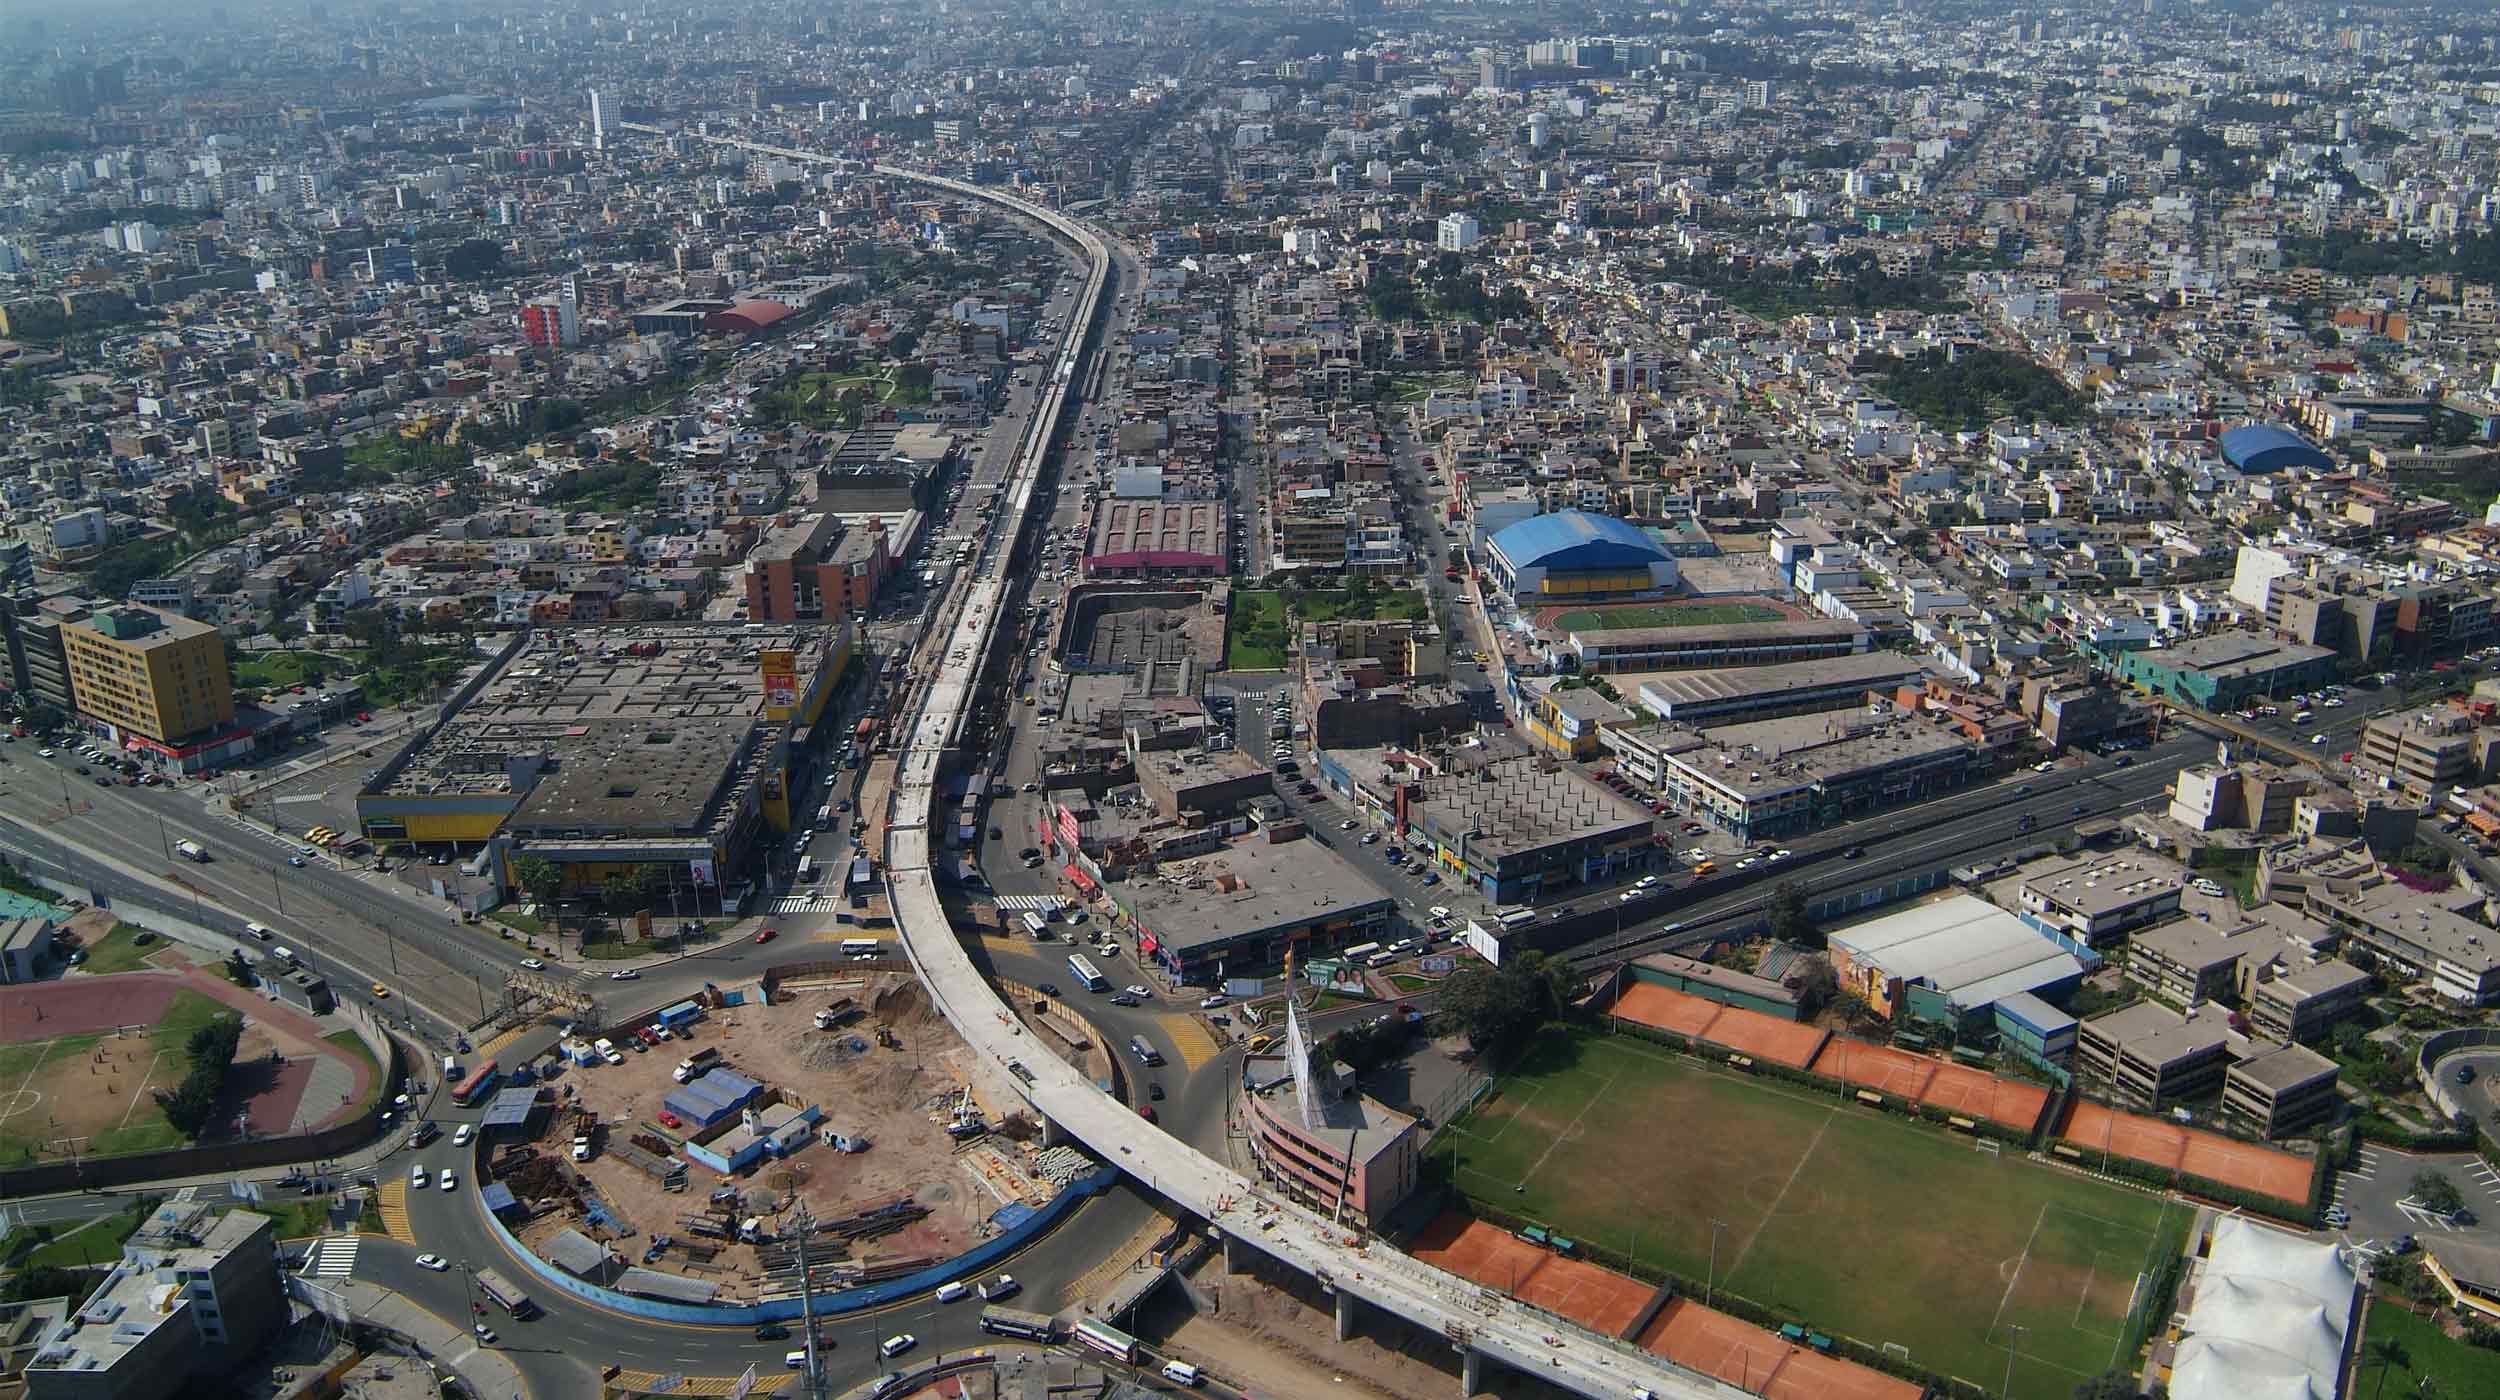 This emblematic project of the City of Lima involves the construction of a 12.5 km long elevated viaduct and 8 train stations.